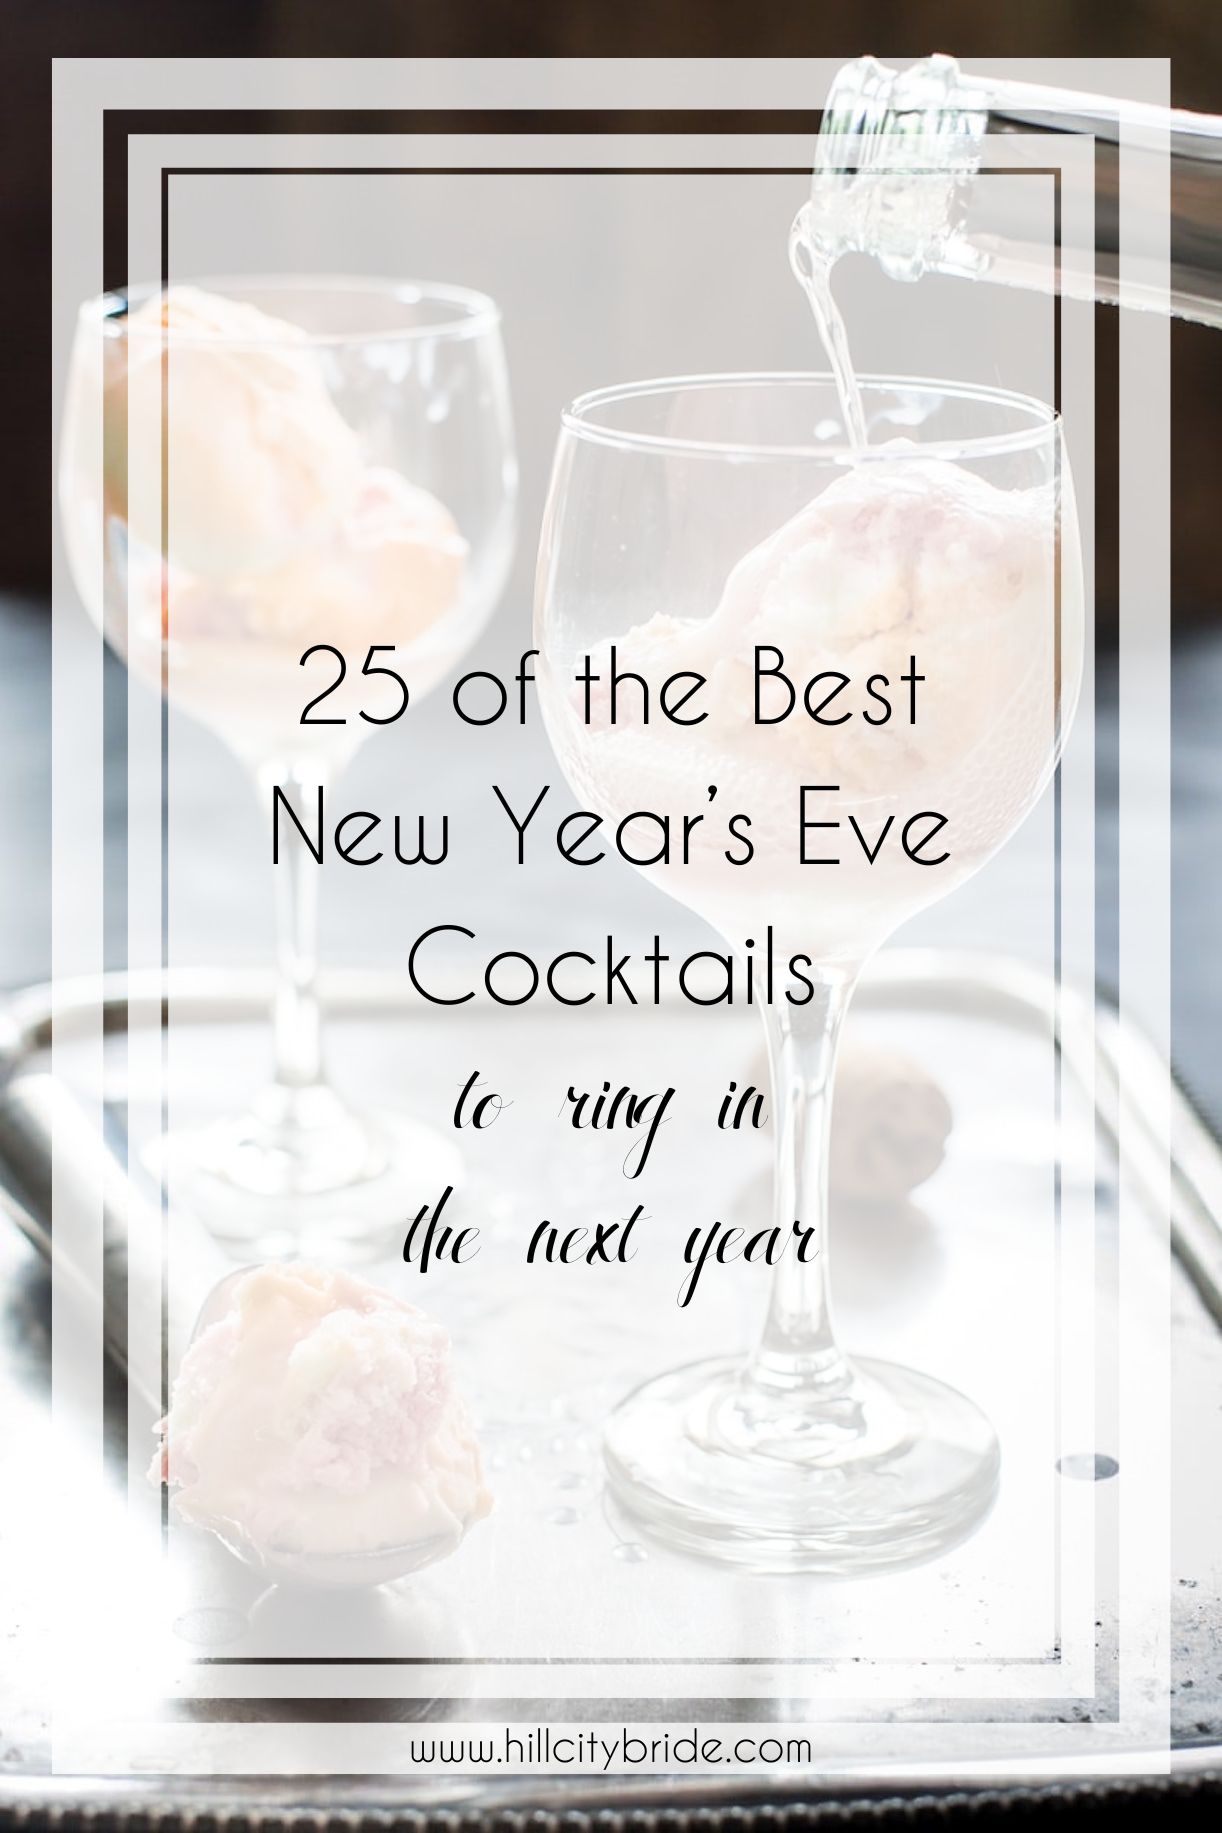 25 of the Best Cocktail Recipes to Make as New Year's Eve Drinks